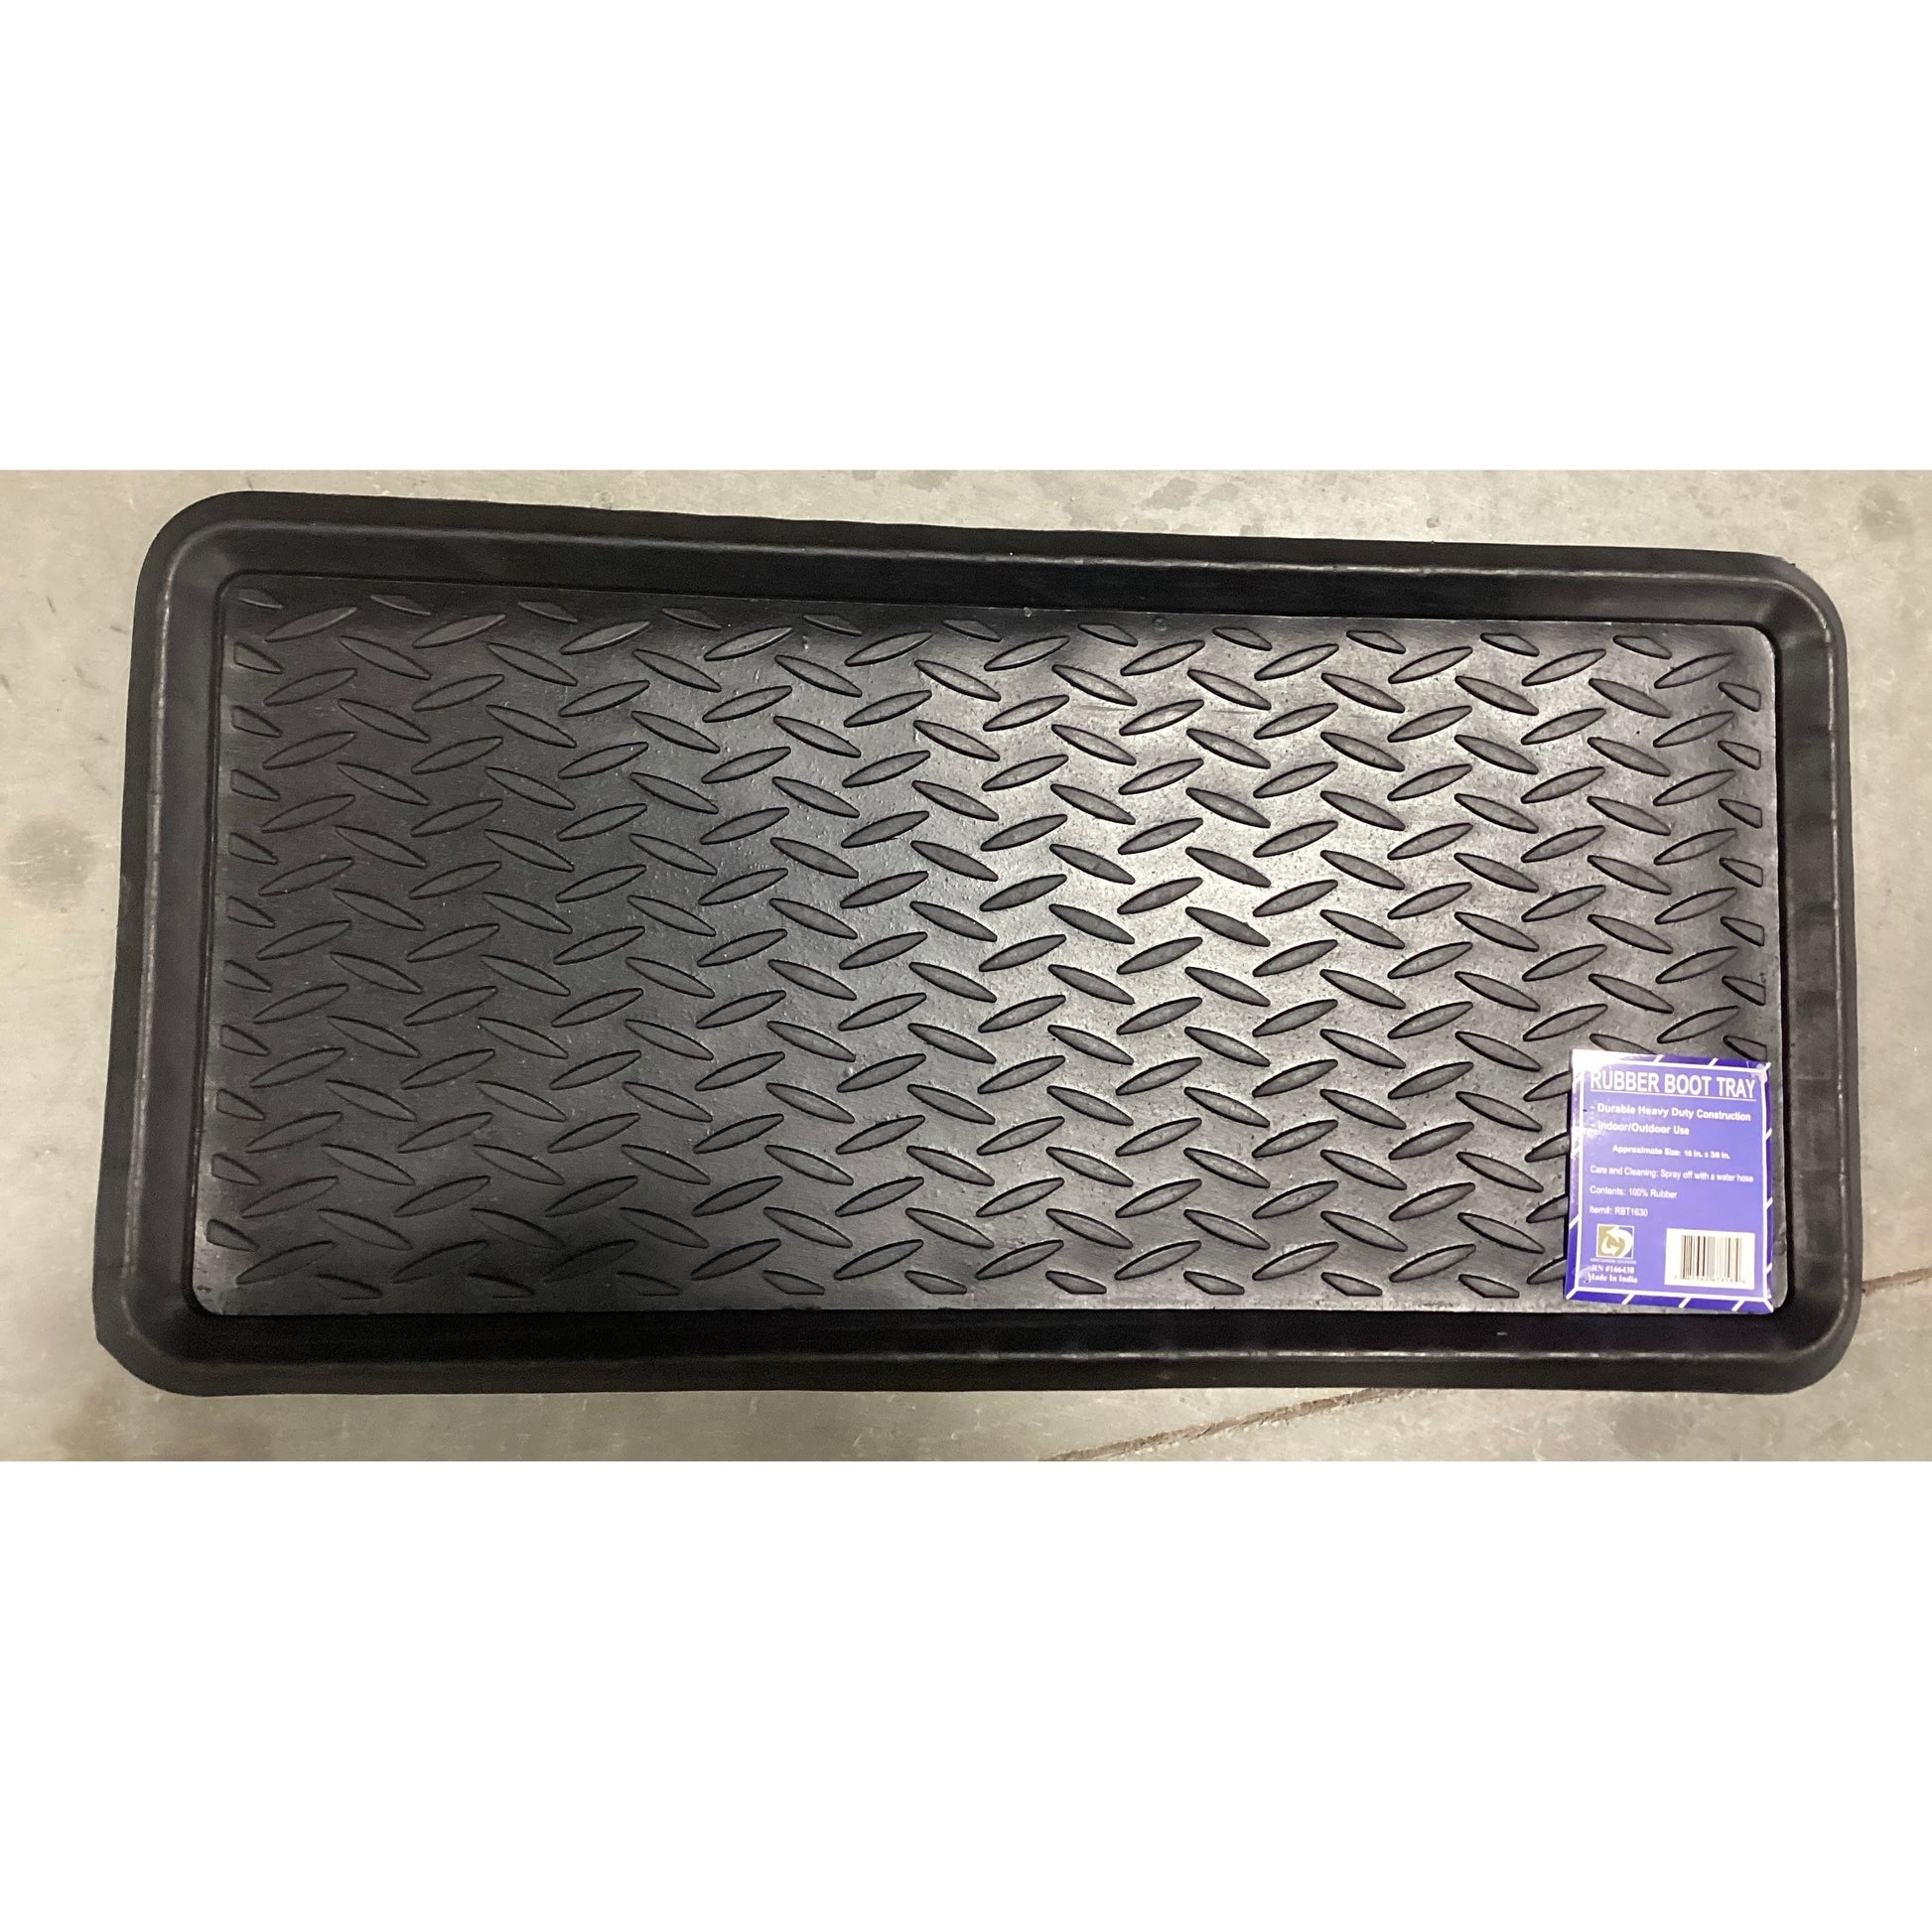 A black plastic boot tray with a diamond pattern, perfect for keeping your floors clean and organized.